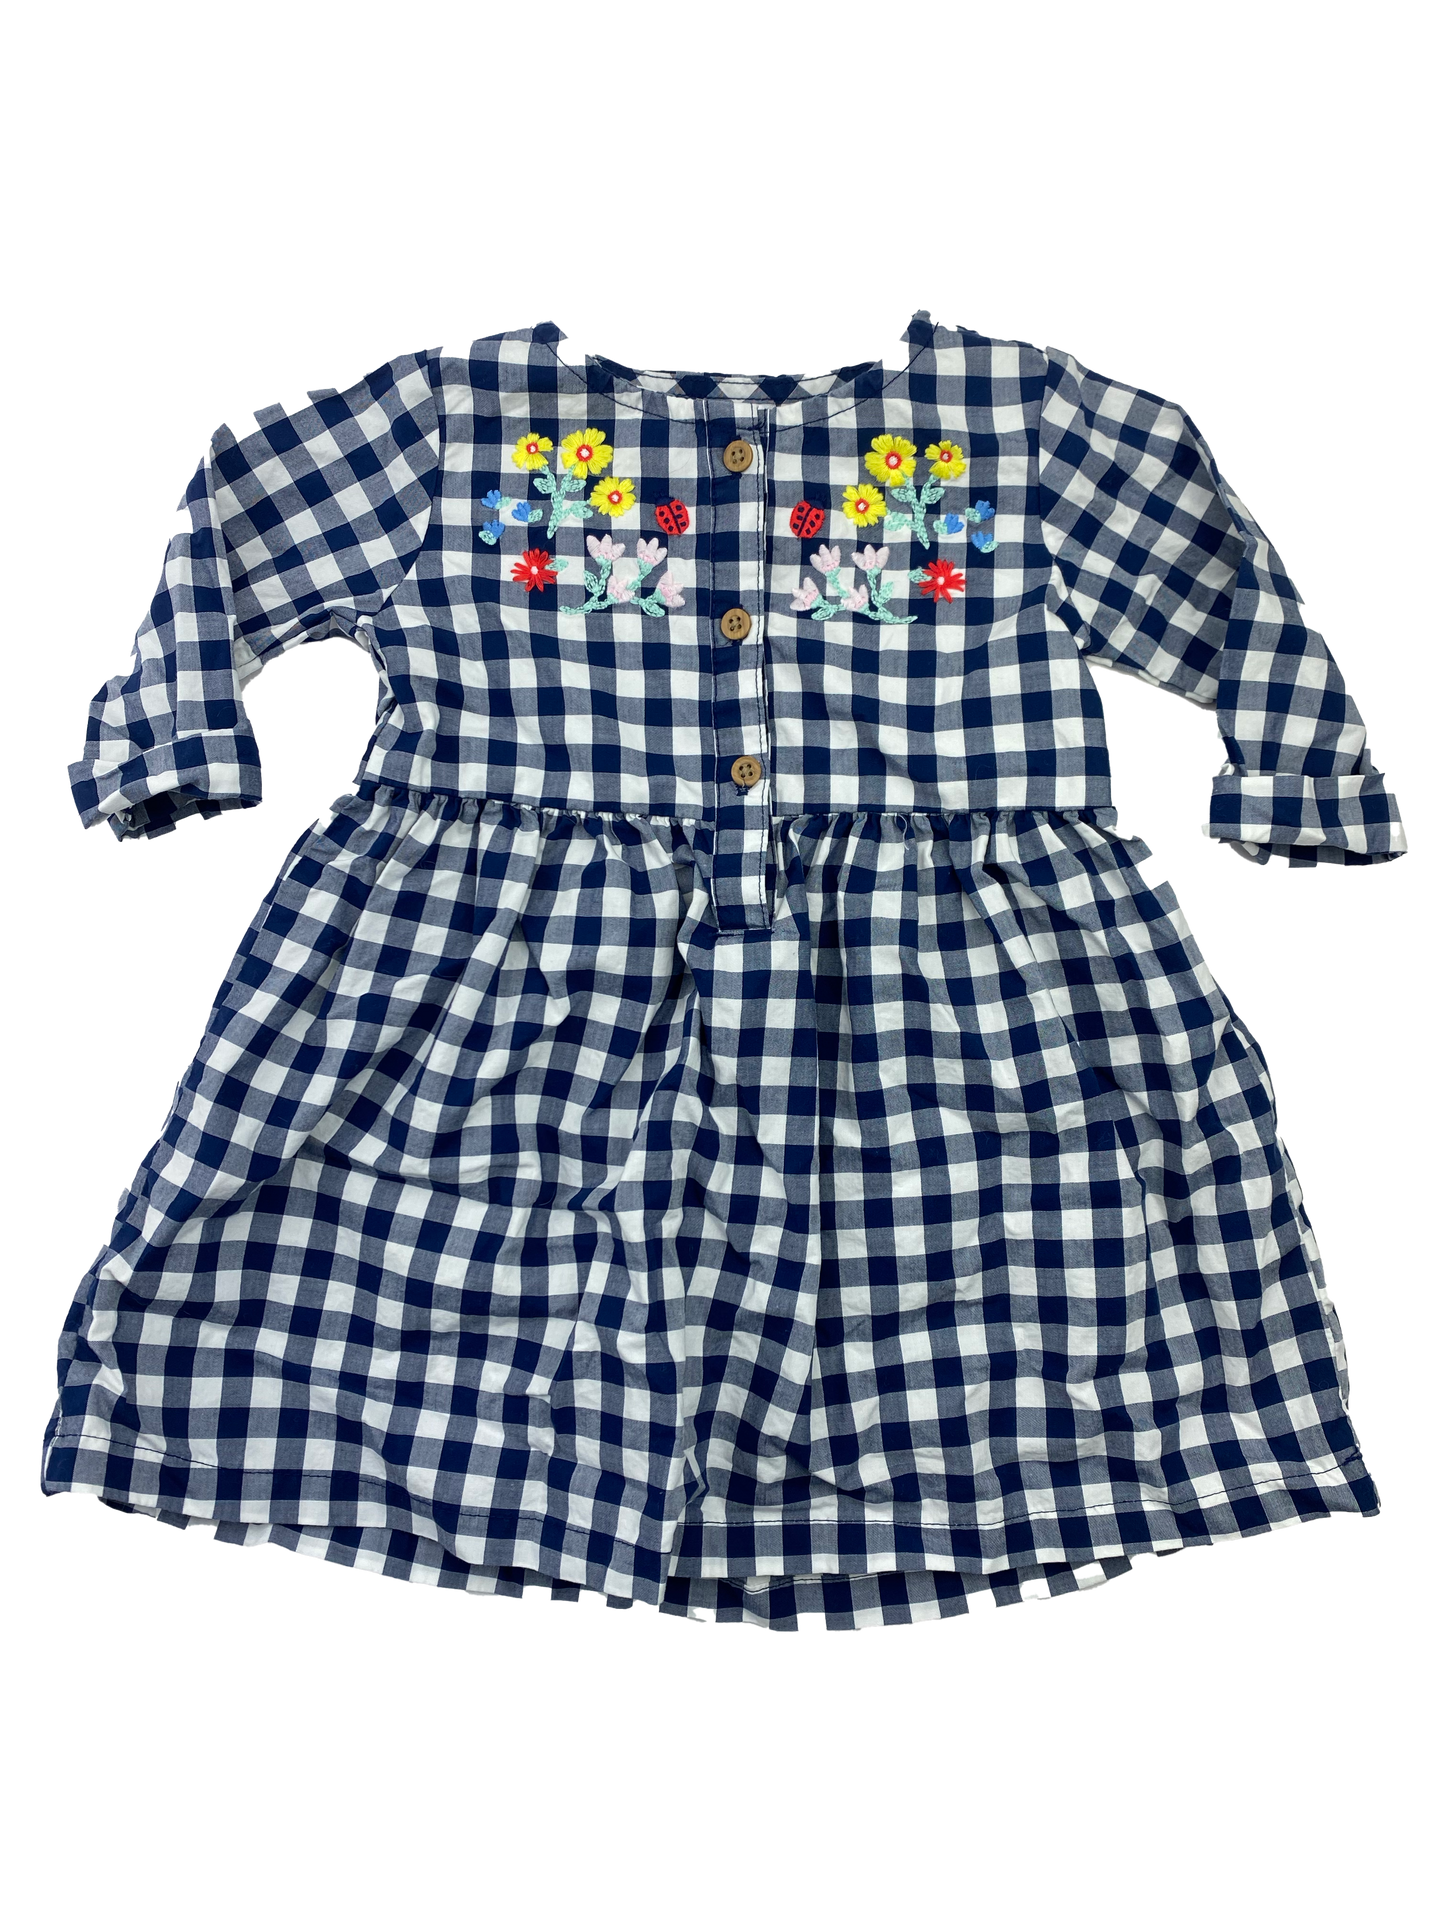 Carter's Navy & White Gingham Long Sleeve Dress with Flowers 18M